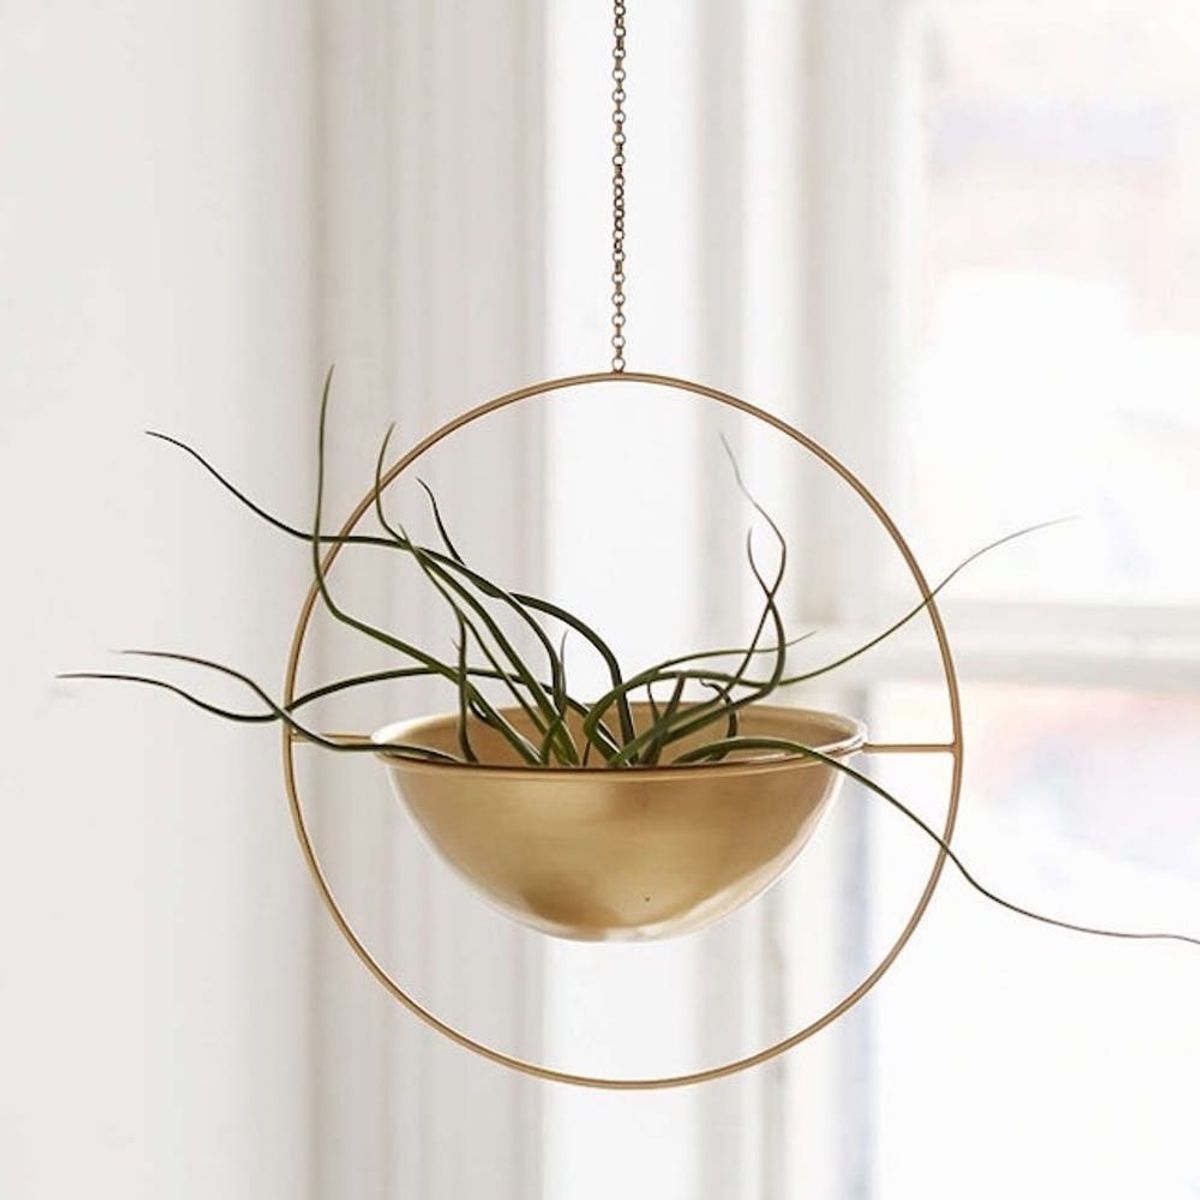 15 Metallic Planters to Add Some Sparkle to Your Indoor Garden